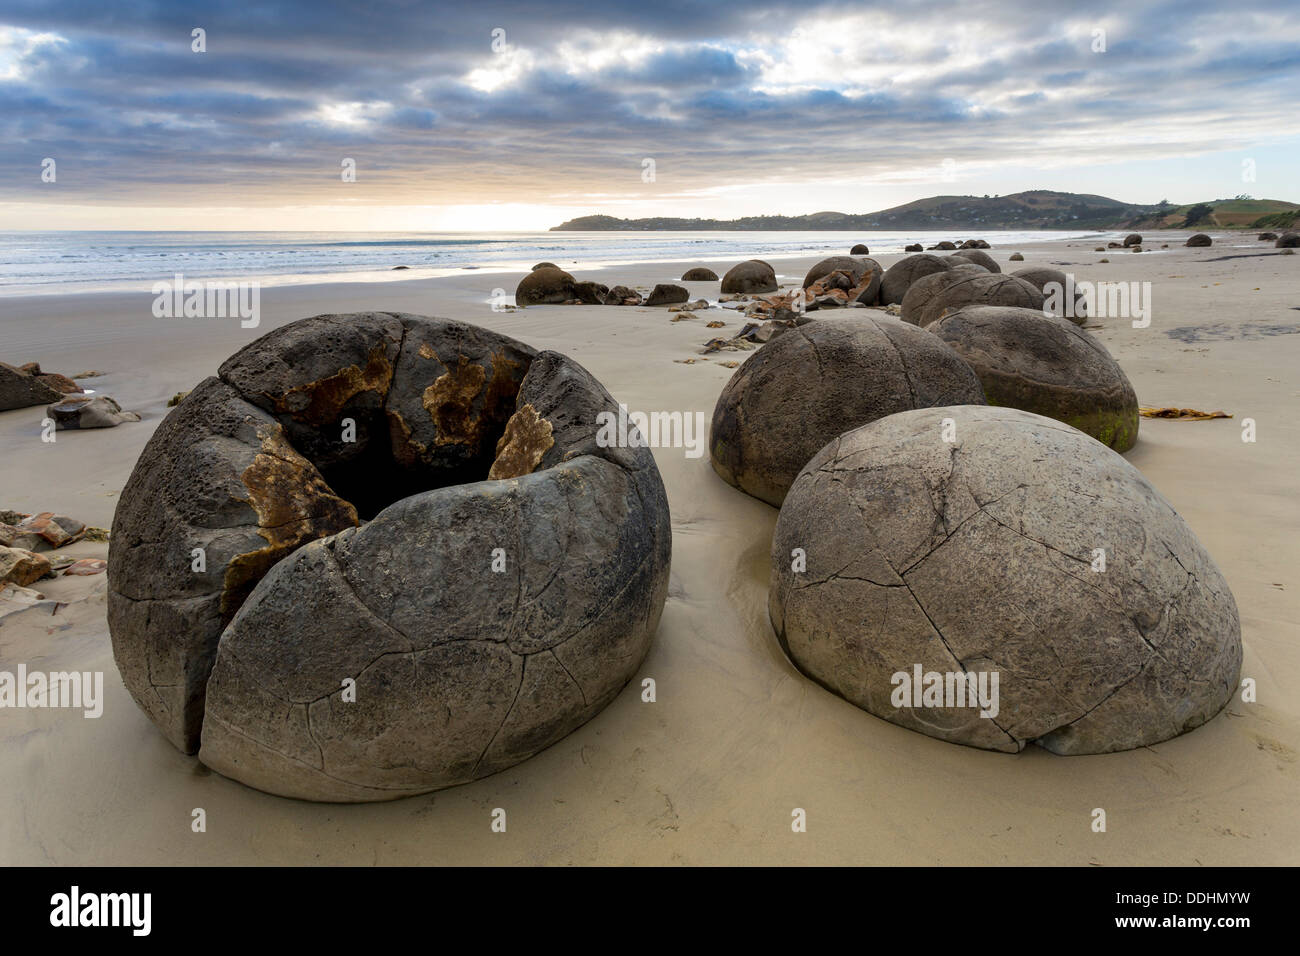 Moeraki Boulders on the beach in the early morning Stock Photo